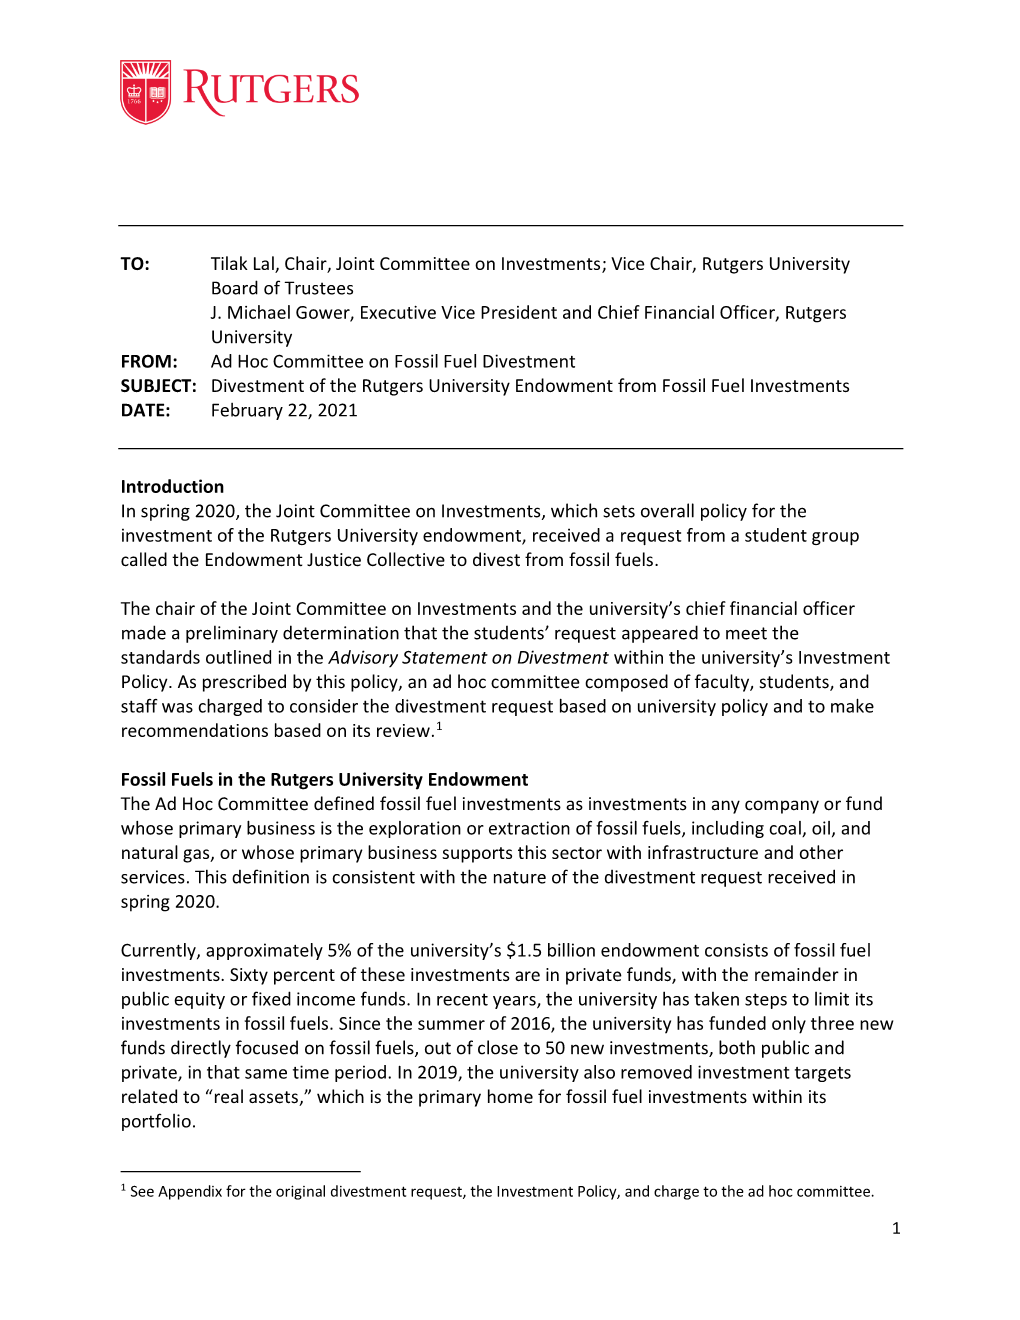 Ad Hoc Committee on Fossil Fuel Divestment Report